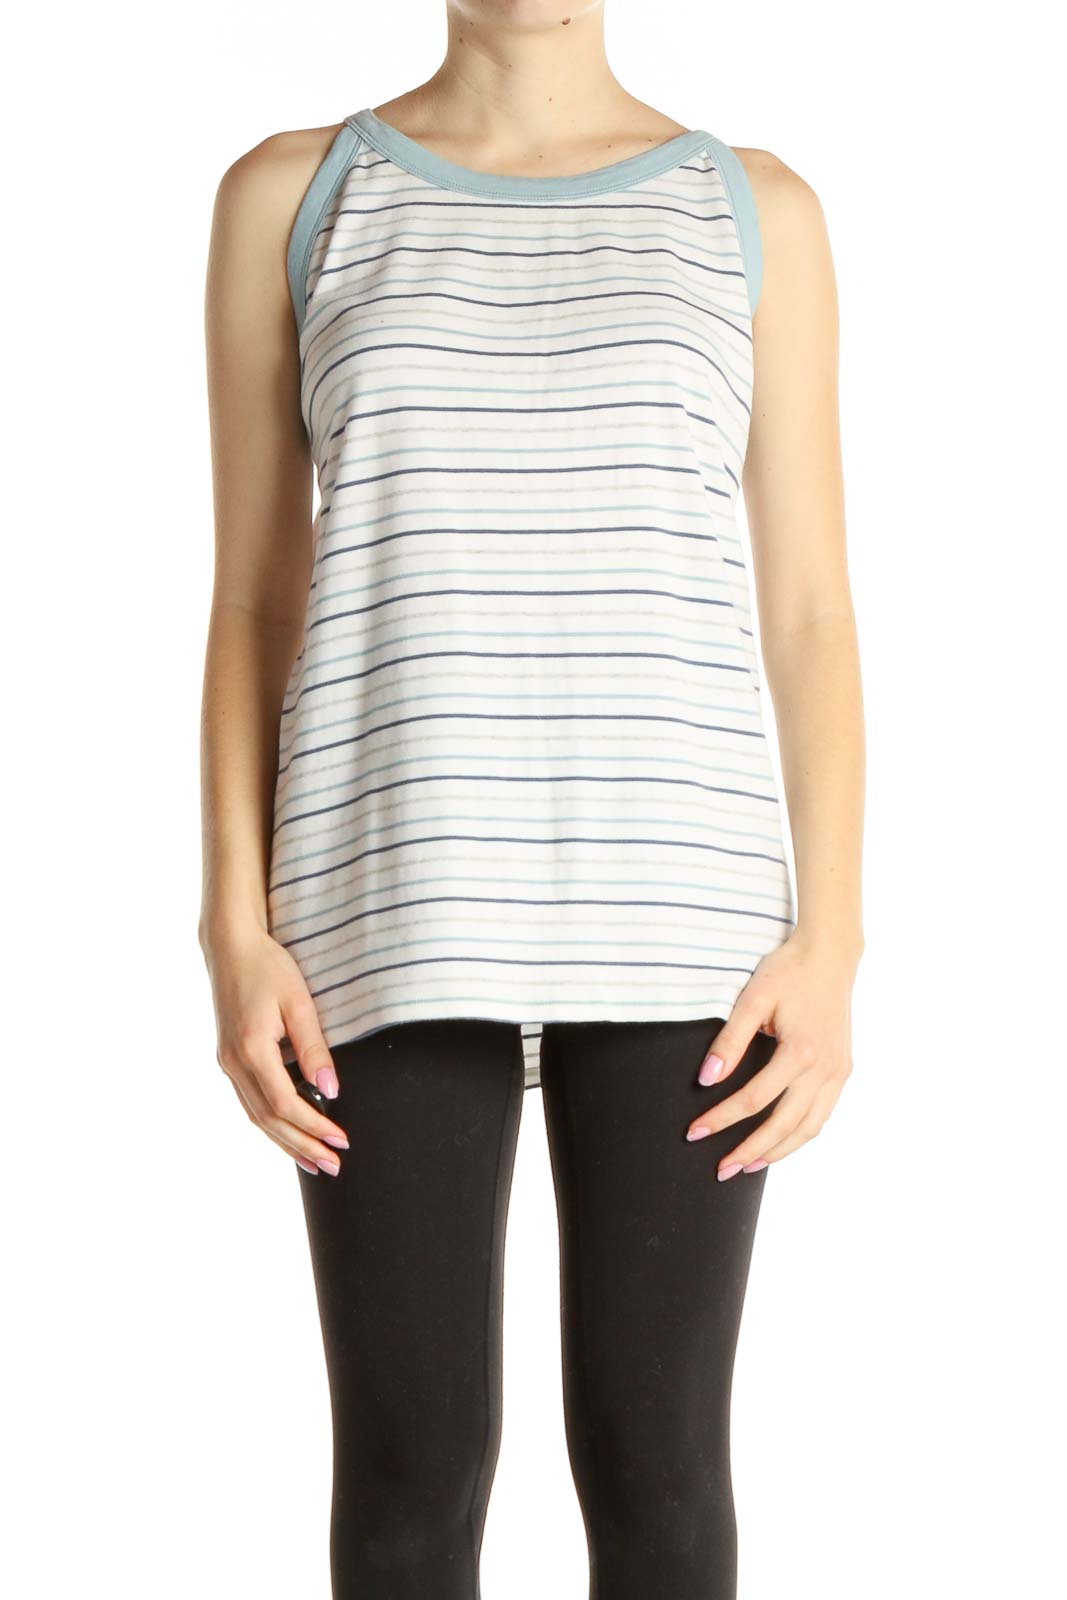 Blue Striped Tank Top Front